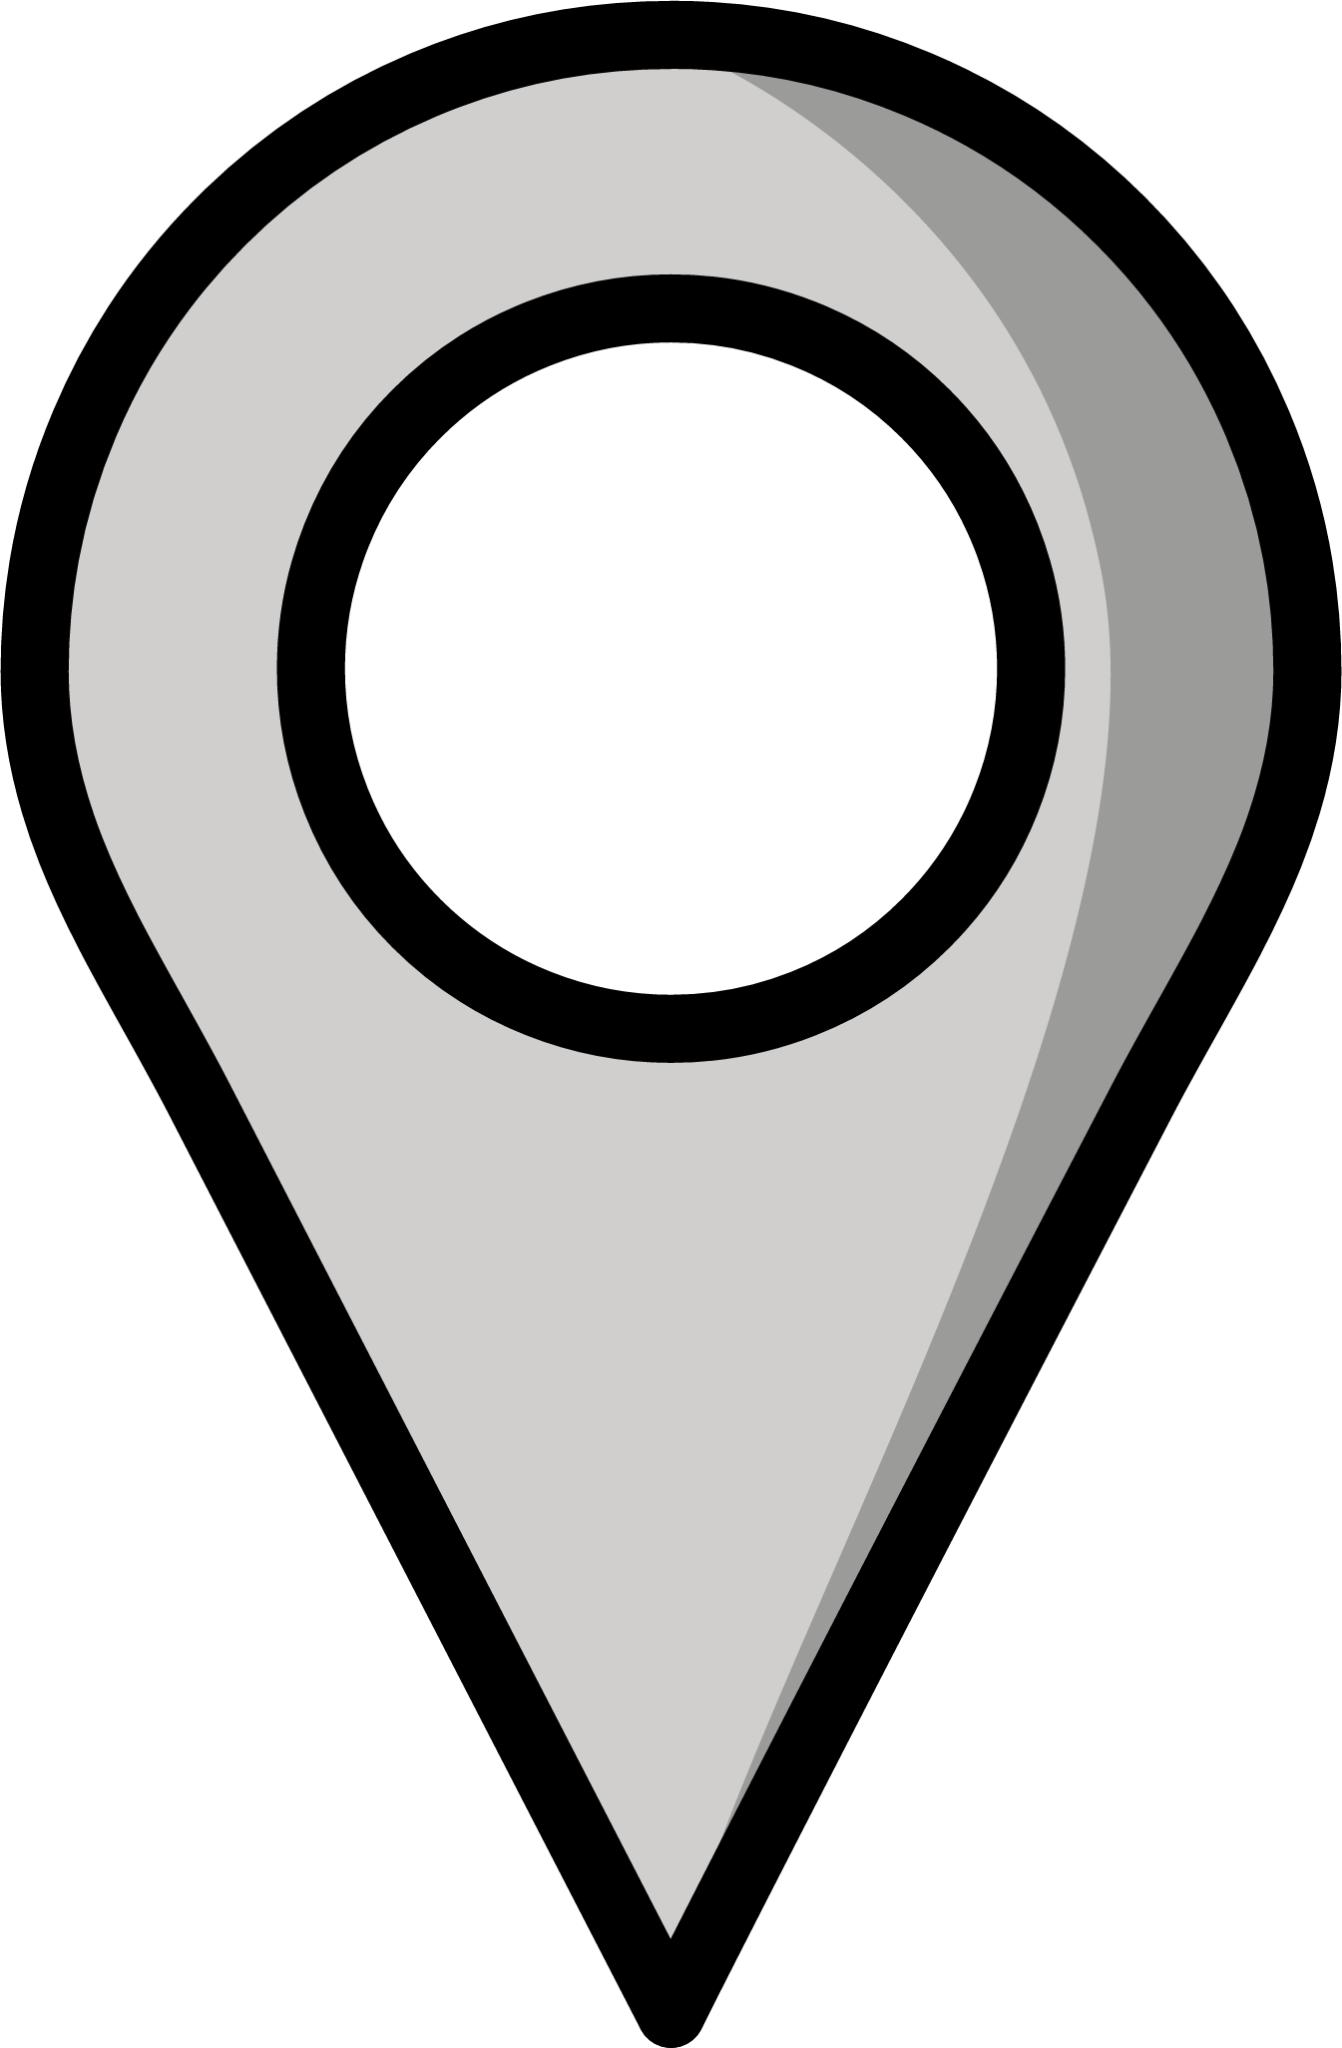 location pin symbol copy and paste